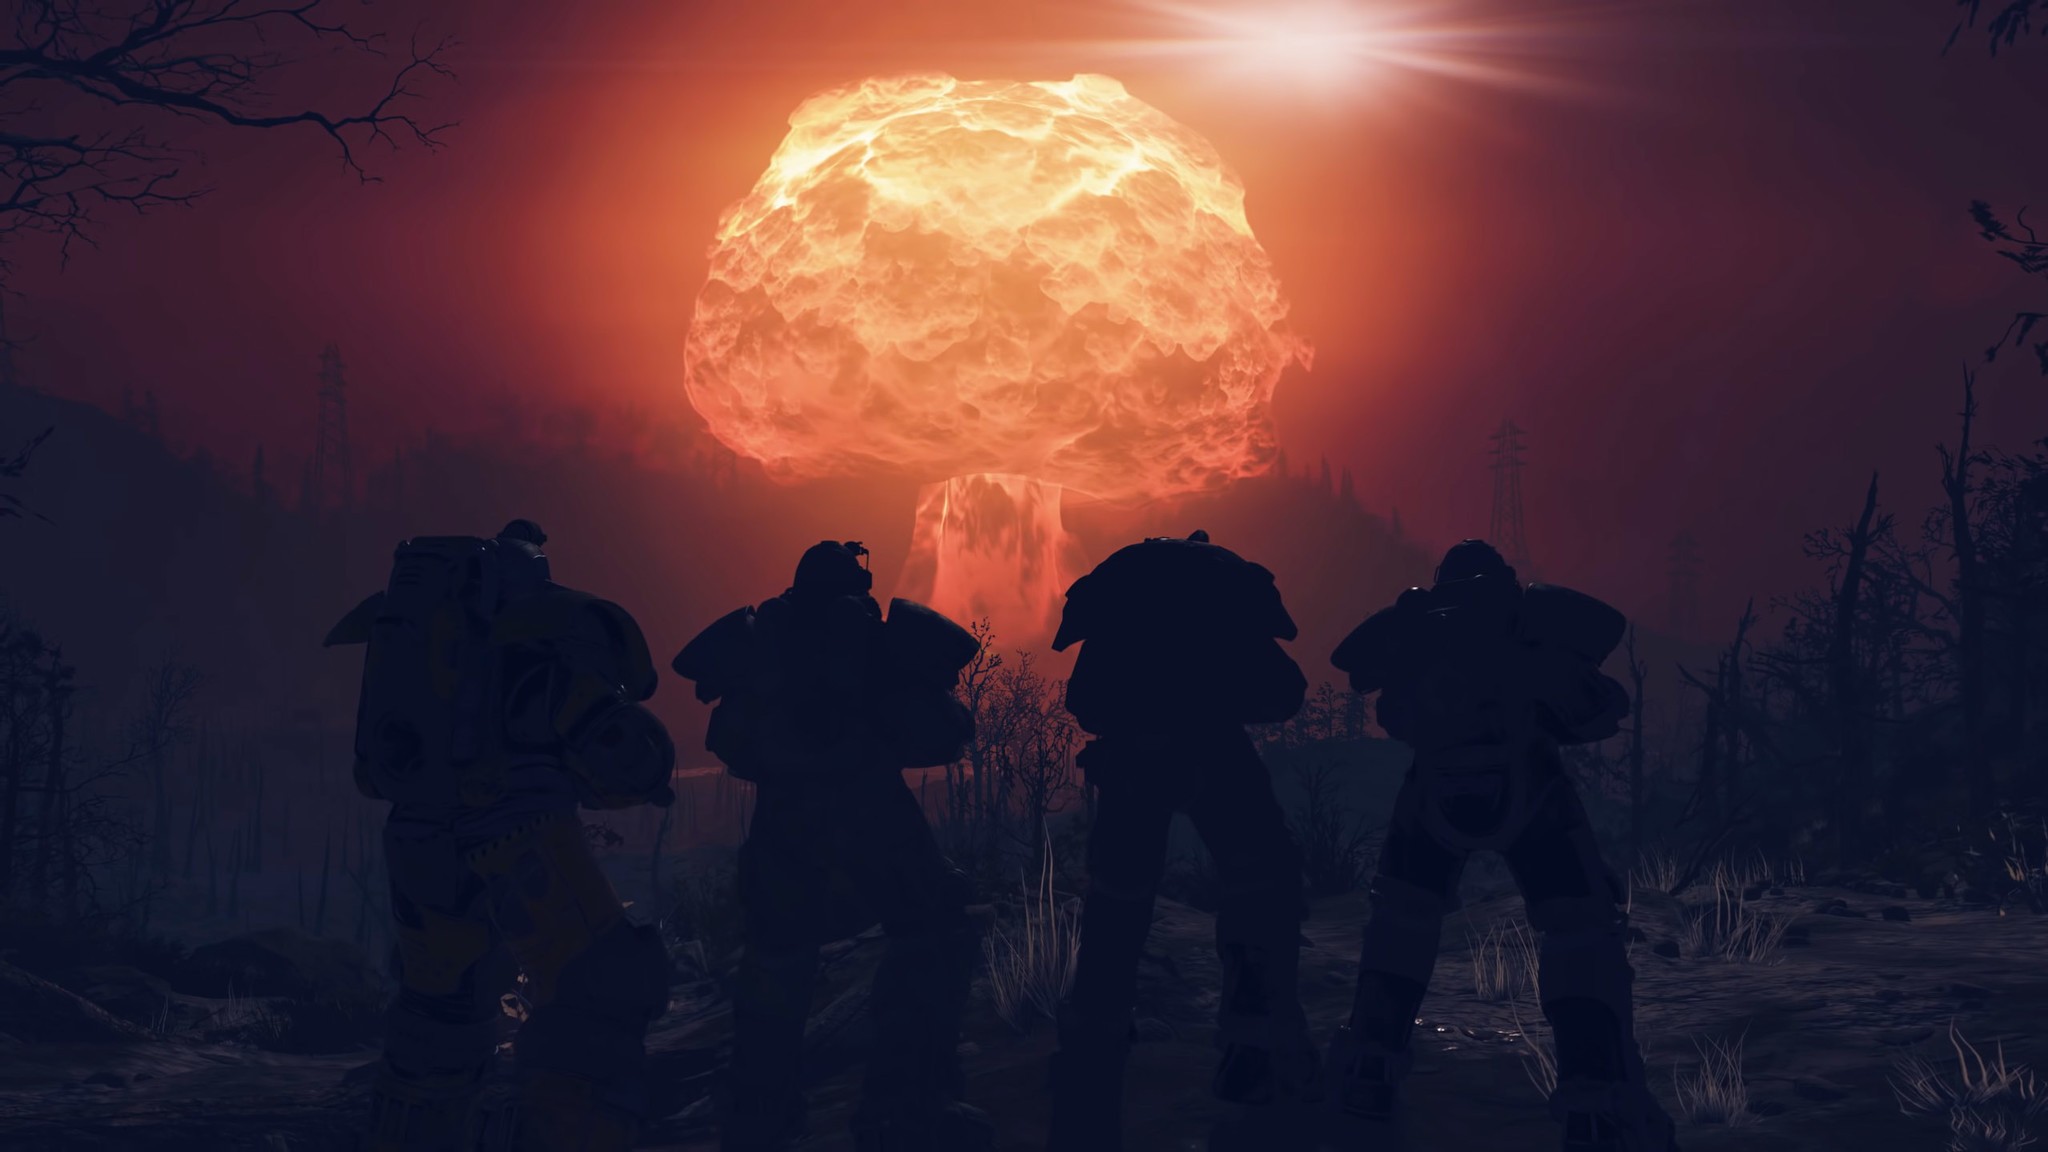 Four Fallout 76 players watch a nuke go off